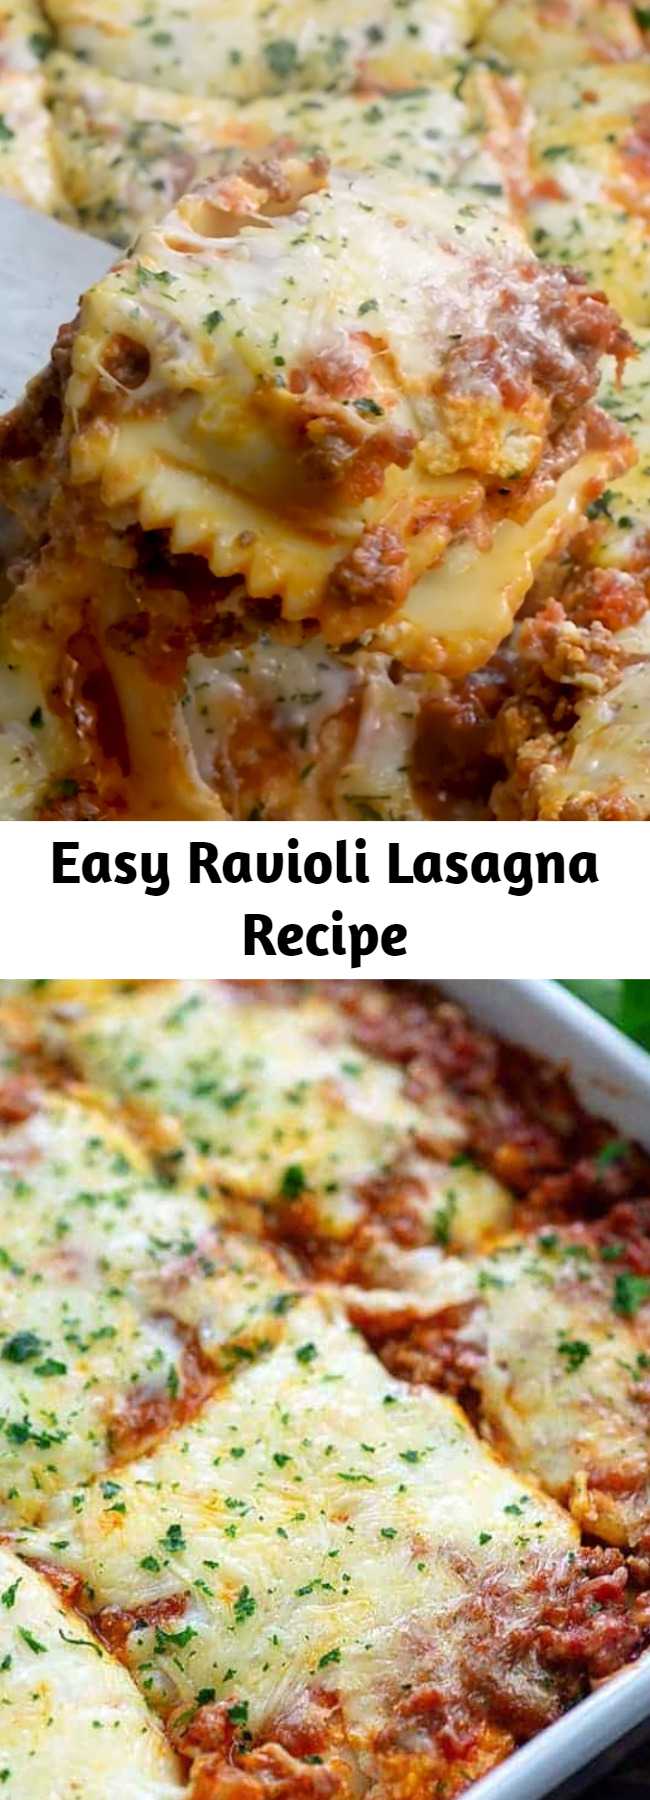 Easy Ravioli Lasagna Recipe - This easy lasagna is made with layers of frozen cheese ravioli in place of traditional lasagna noodles. You’re going to love how ooey gooey cheesy this ravioli lasagna bake is! #lasagna #casserole #recipe #easy